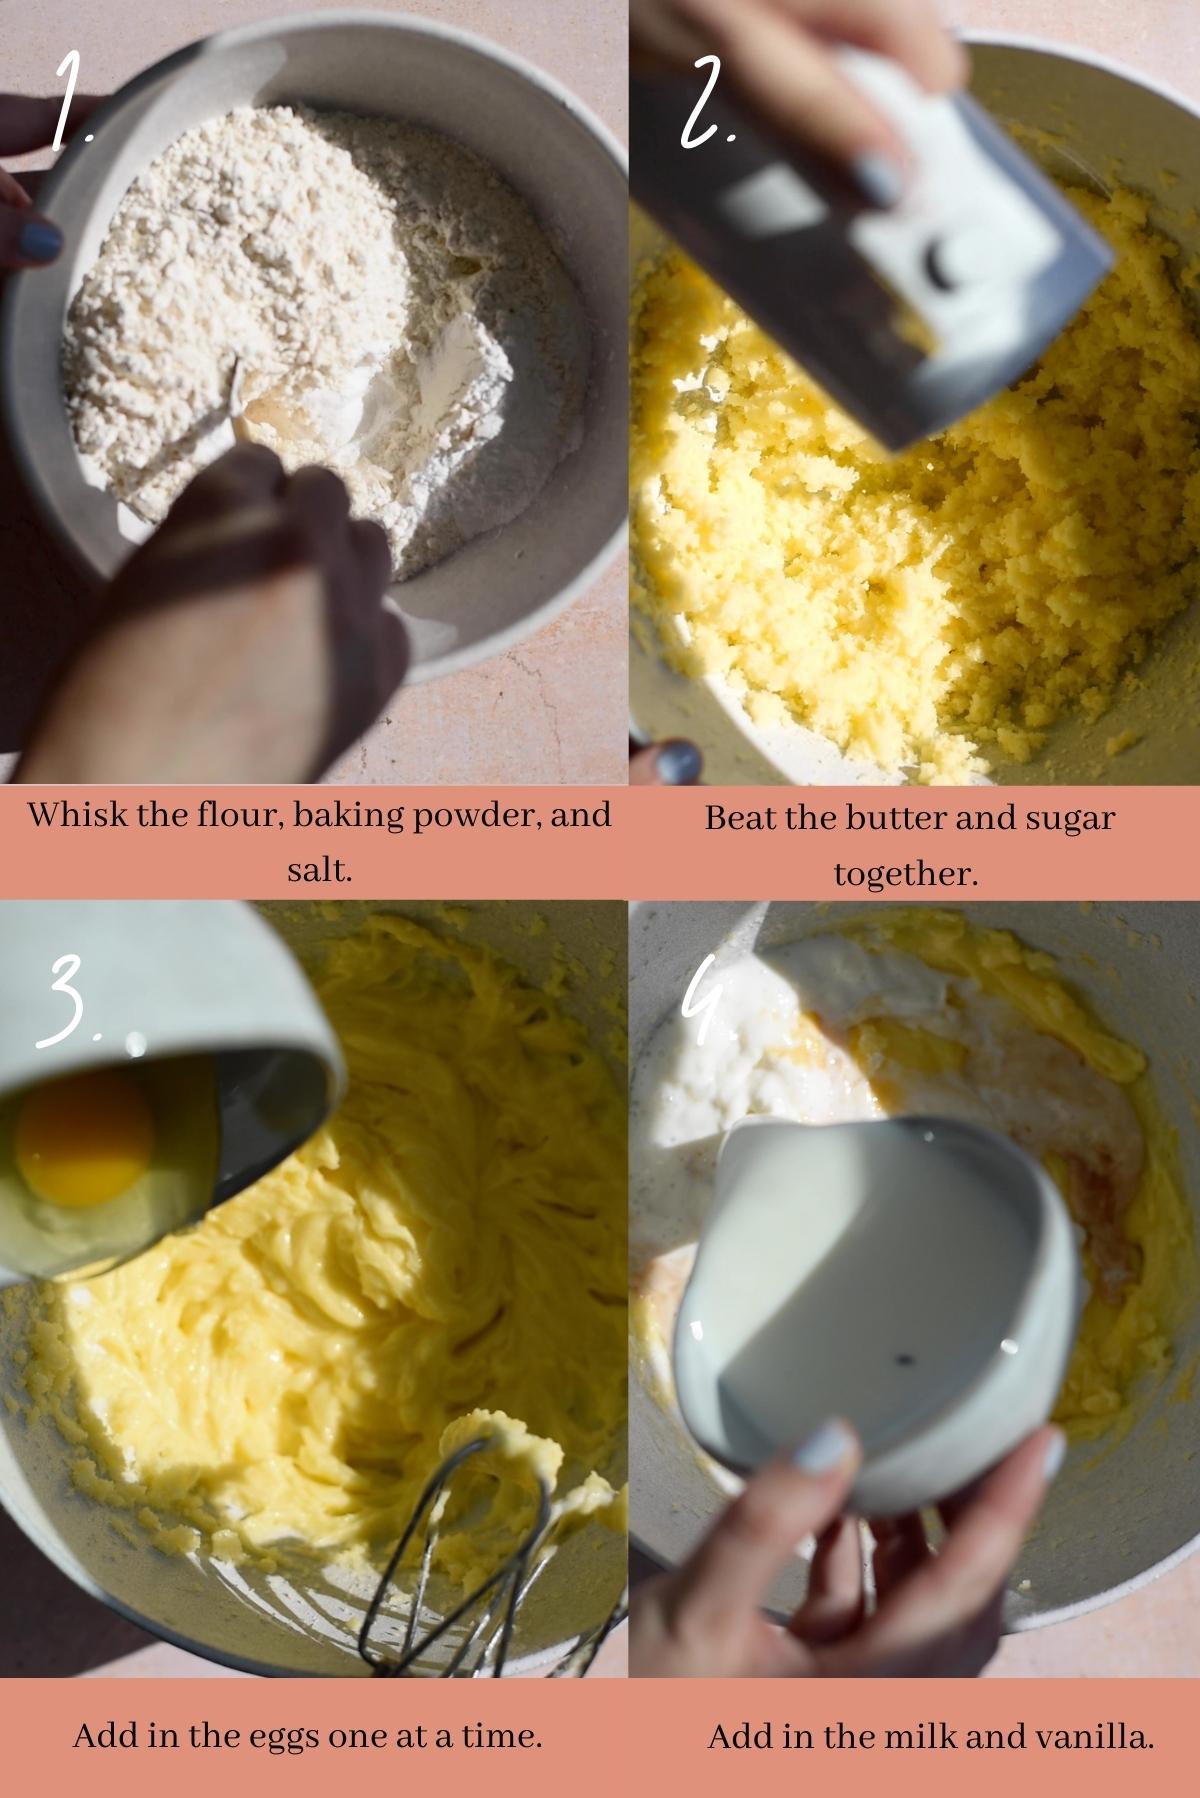 Collage showing how to make the cupcakes1.